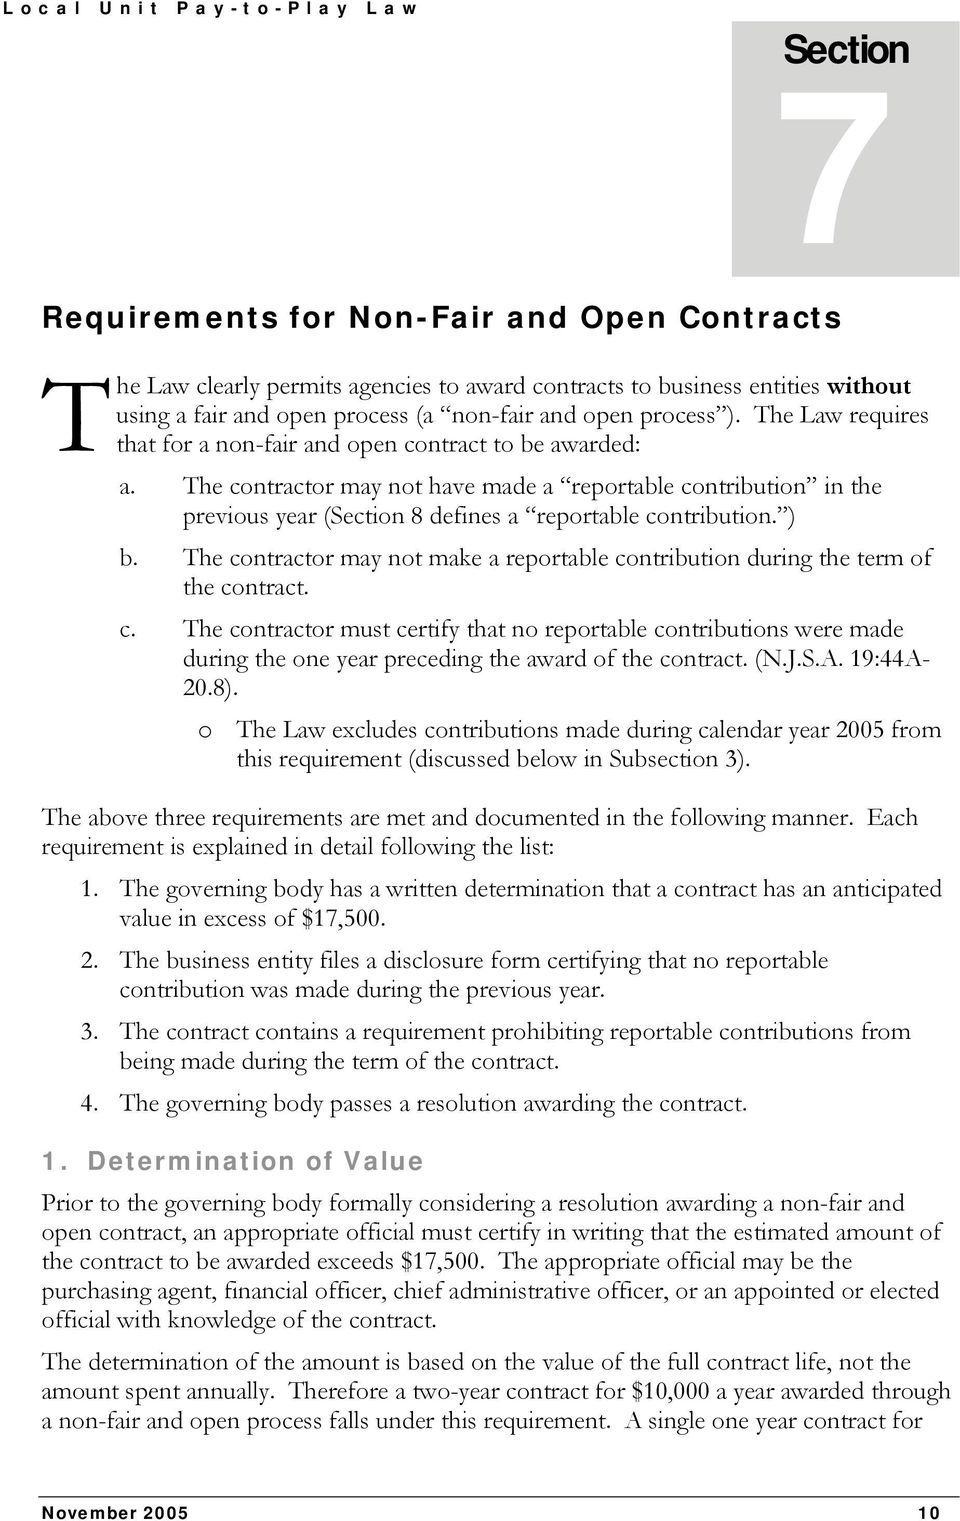 The Law requires that for a non-fair and open contract to be awarded: contractor may not have made a reportable contribution in the previous year (Section 8 defines a reportable contribution. ) b.